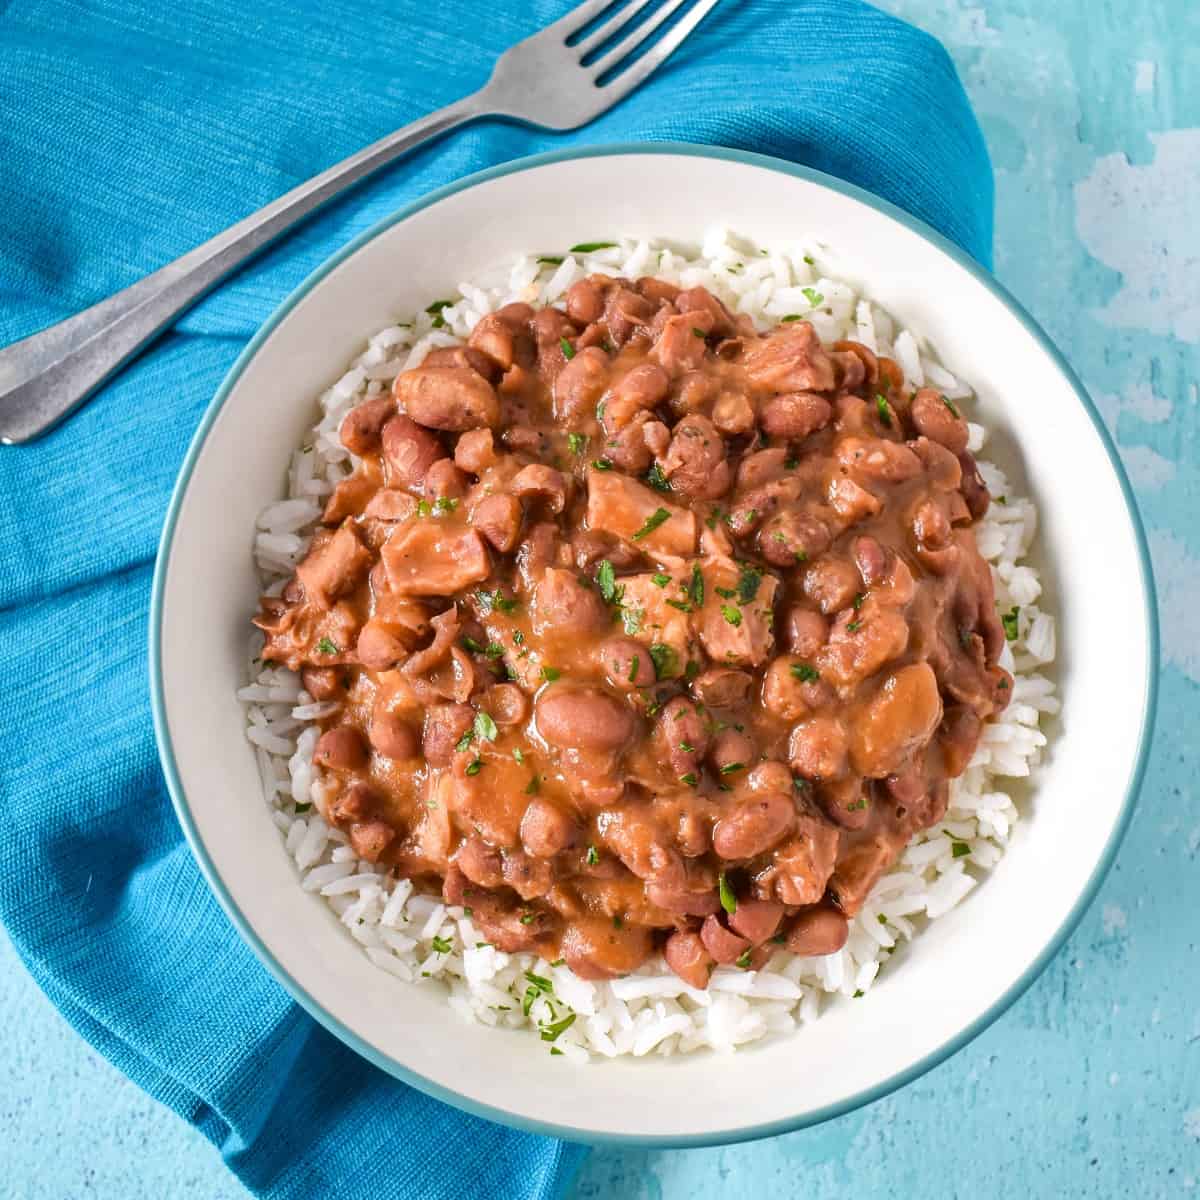 The Cuban-style red beans served over white rice in a white bowl set on an aqua linen.